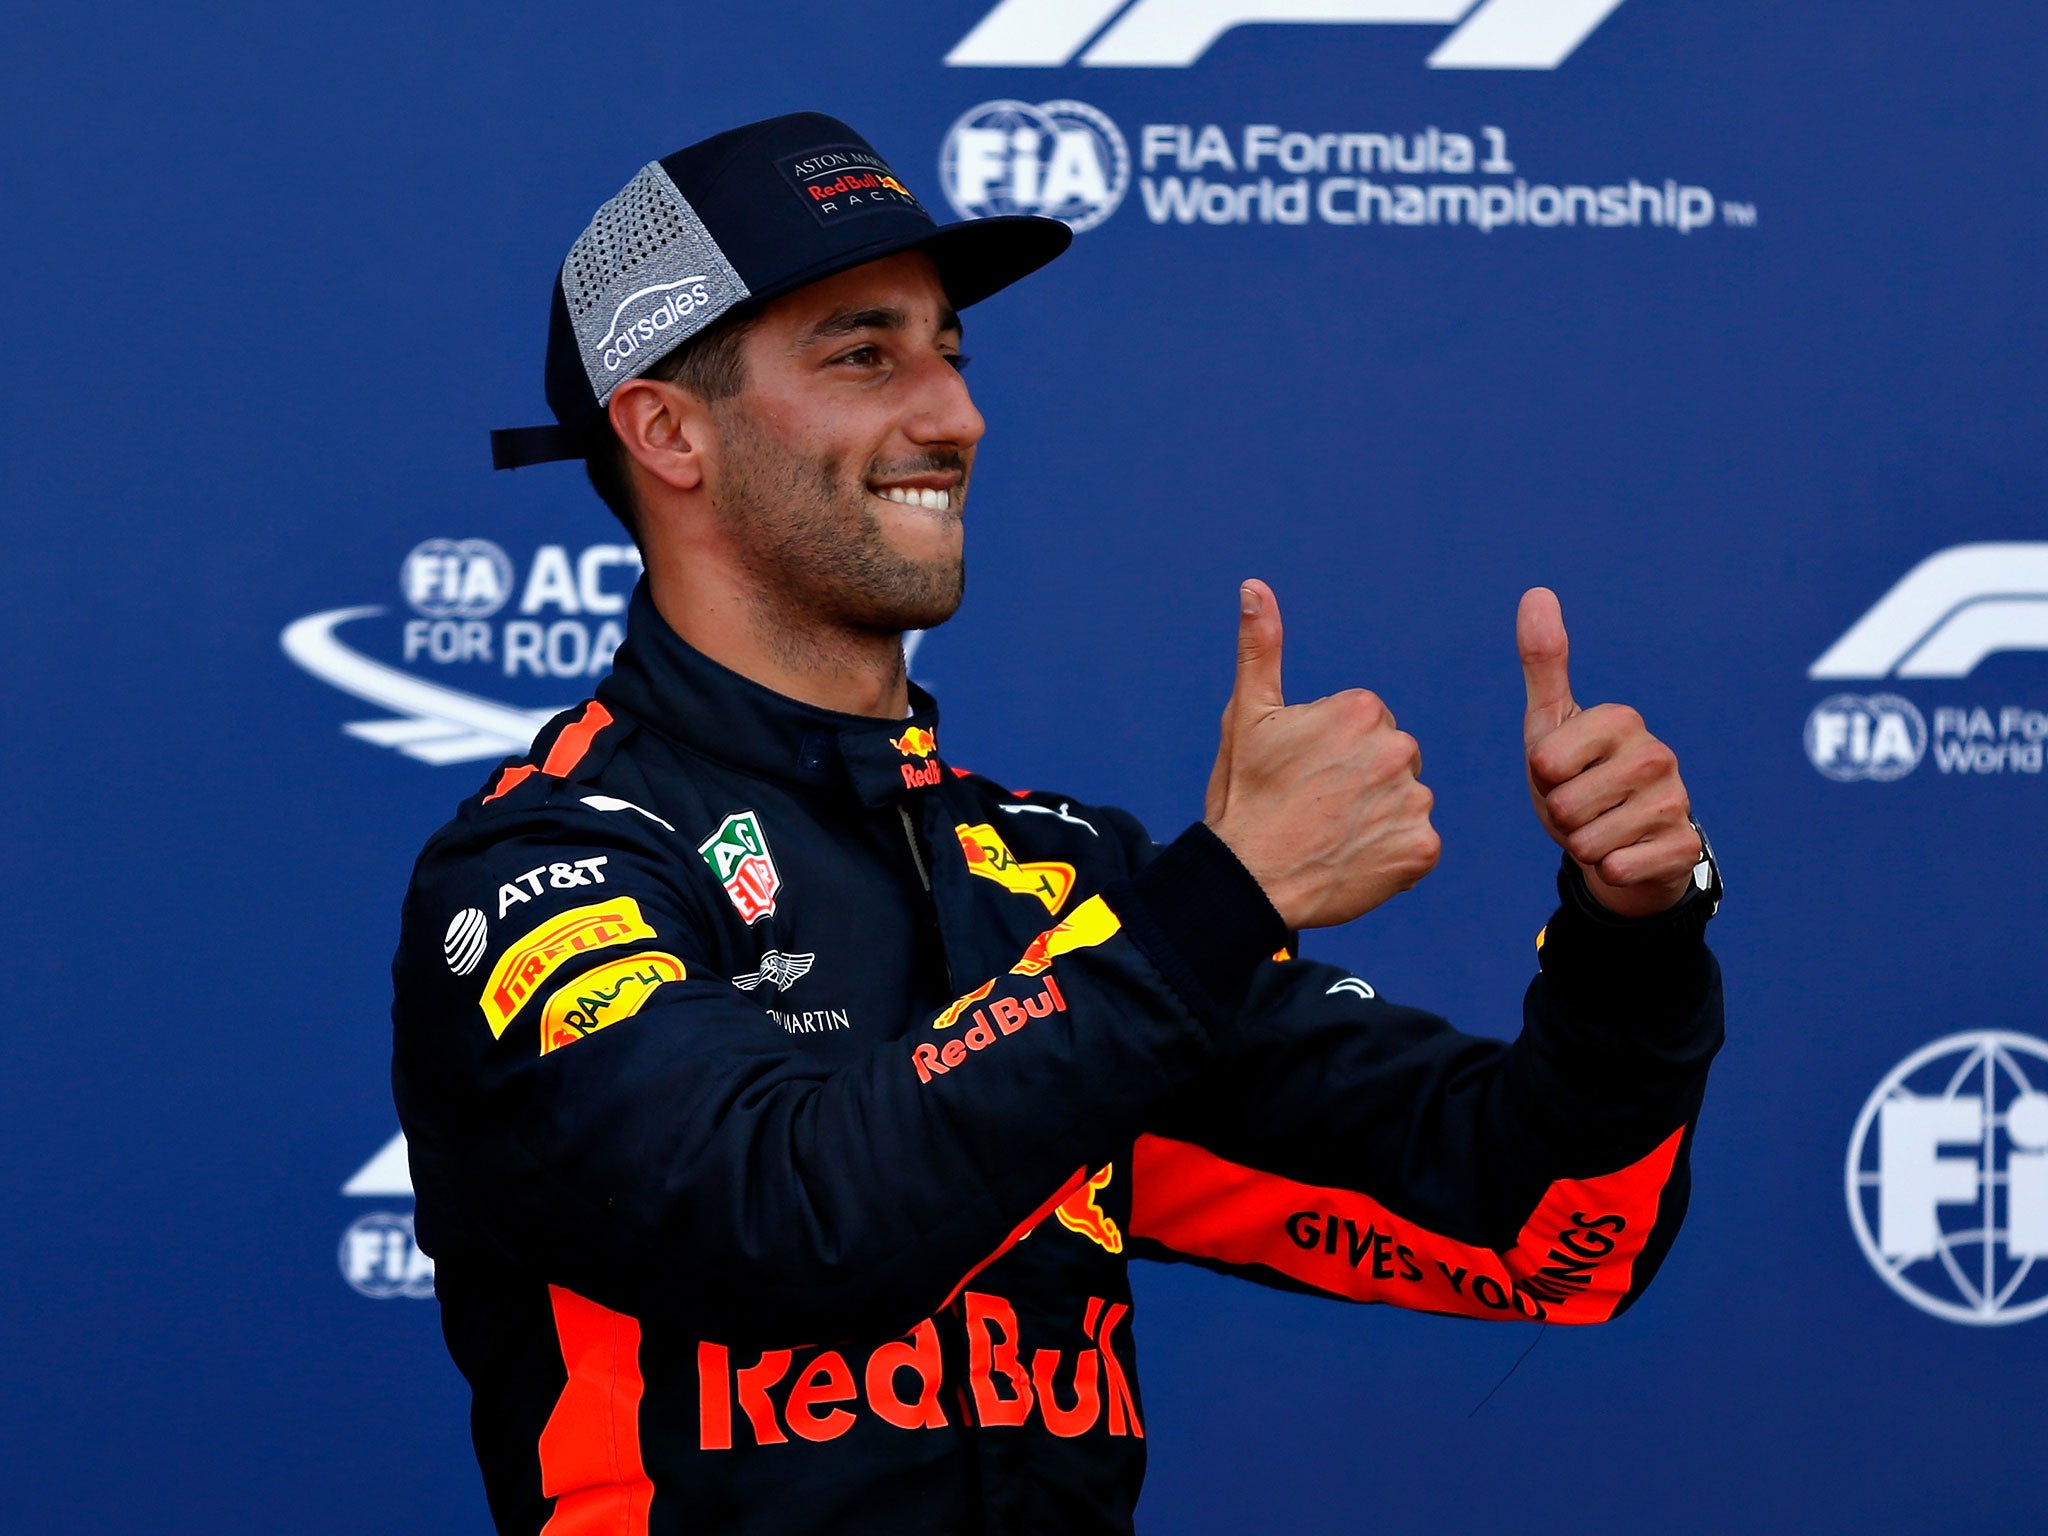 All smiles for Daniel Ricciardo after a stunning performance on the track